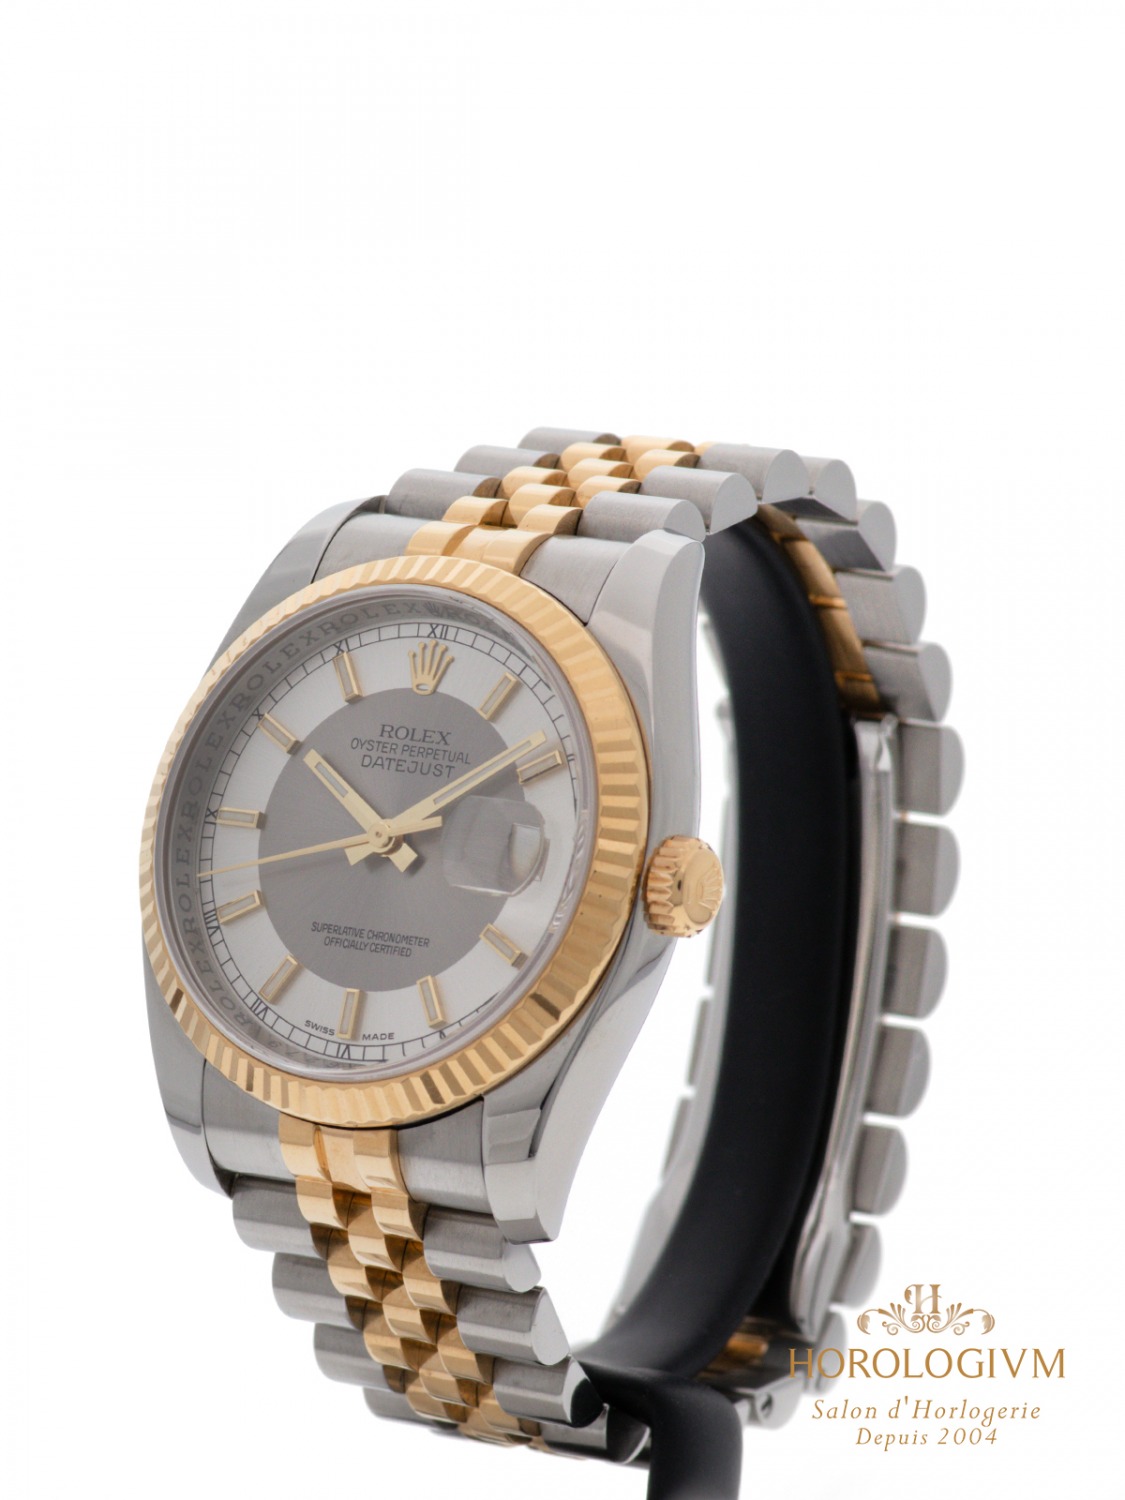 Rolex Datejust TWO-TONE 36MM REF. 116233 watch, two-tone (bi-colored) silver & yellow gold (case) and yellow gold (bezel)